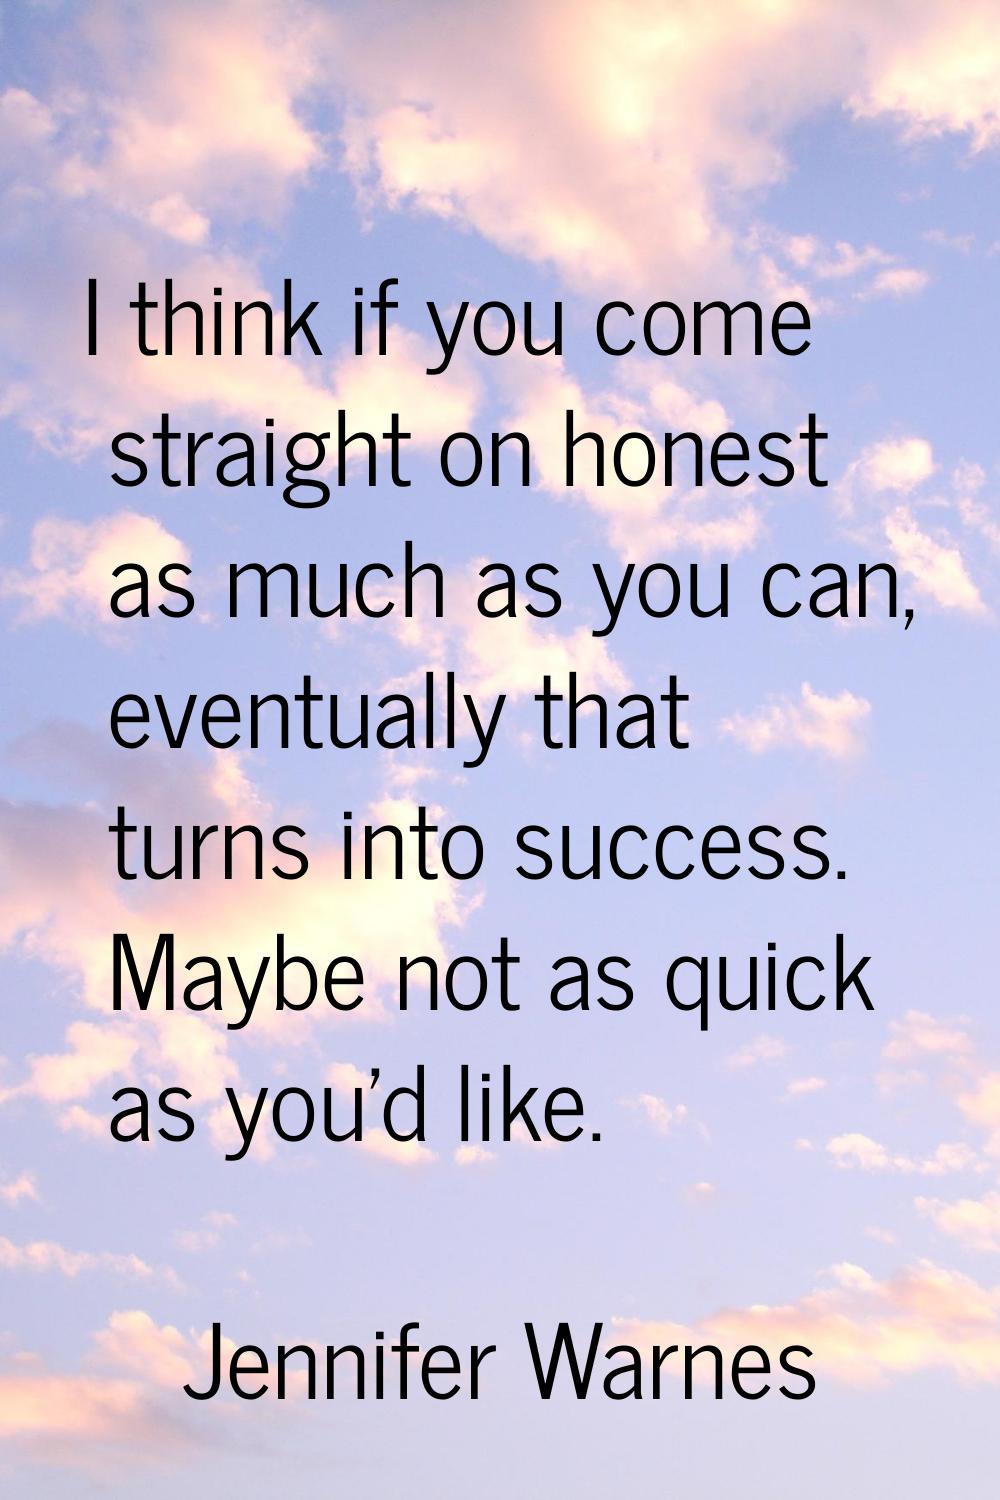 I think if you come straight on honest as much as you can, eventually that turns into success. Mayb